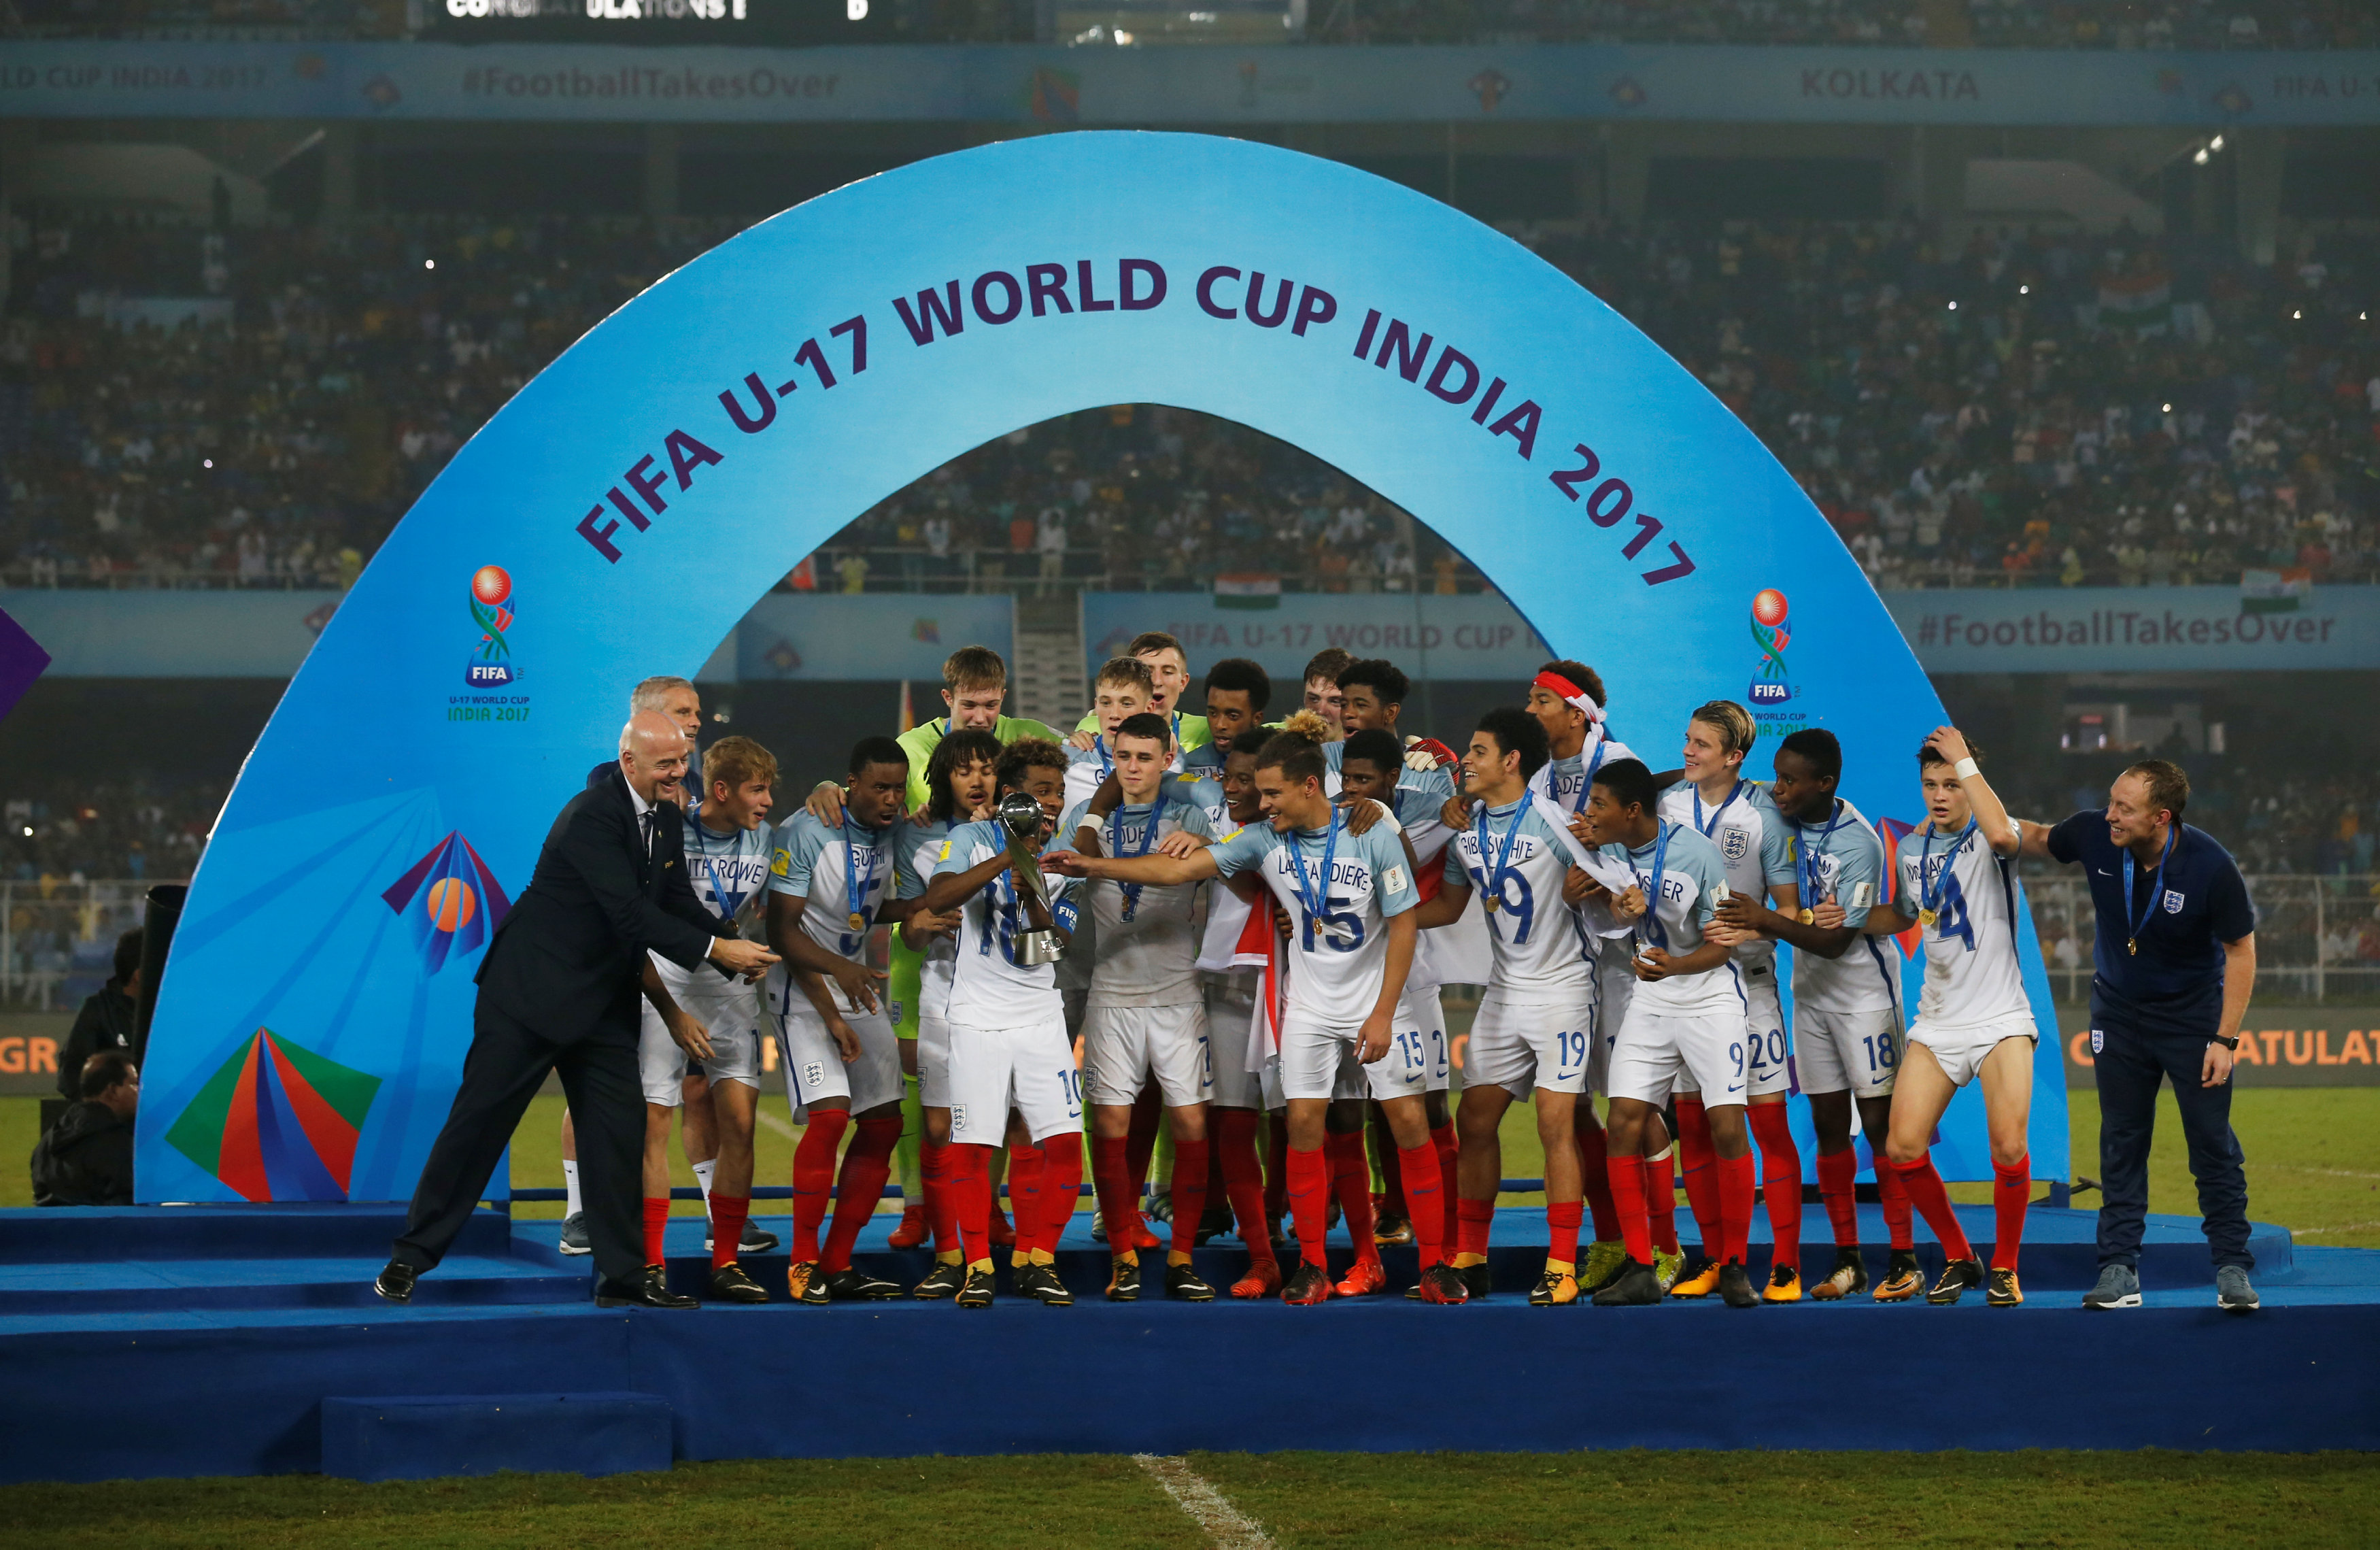 Football: India hosts flawless U-17 World Cup, players display quality on field